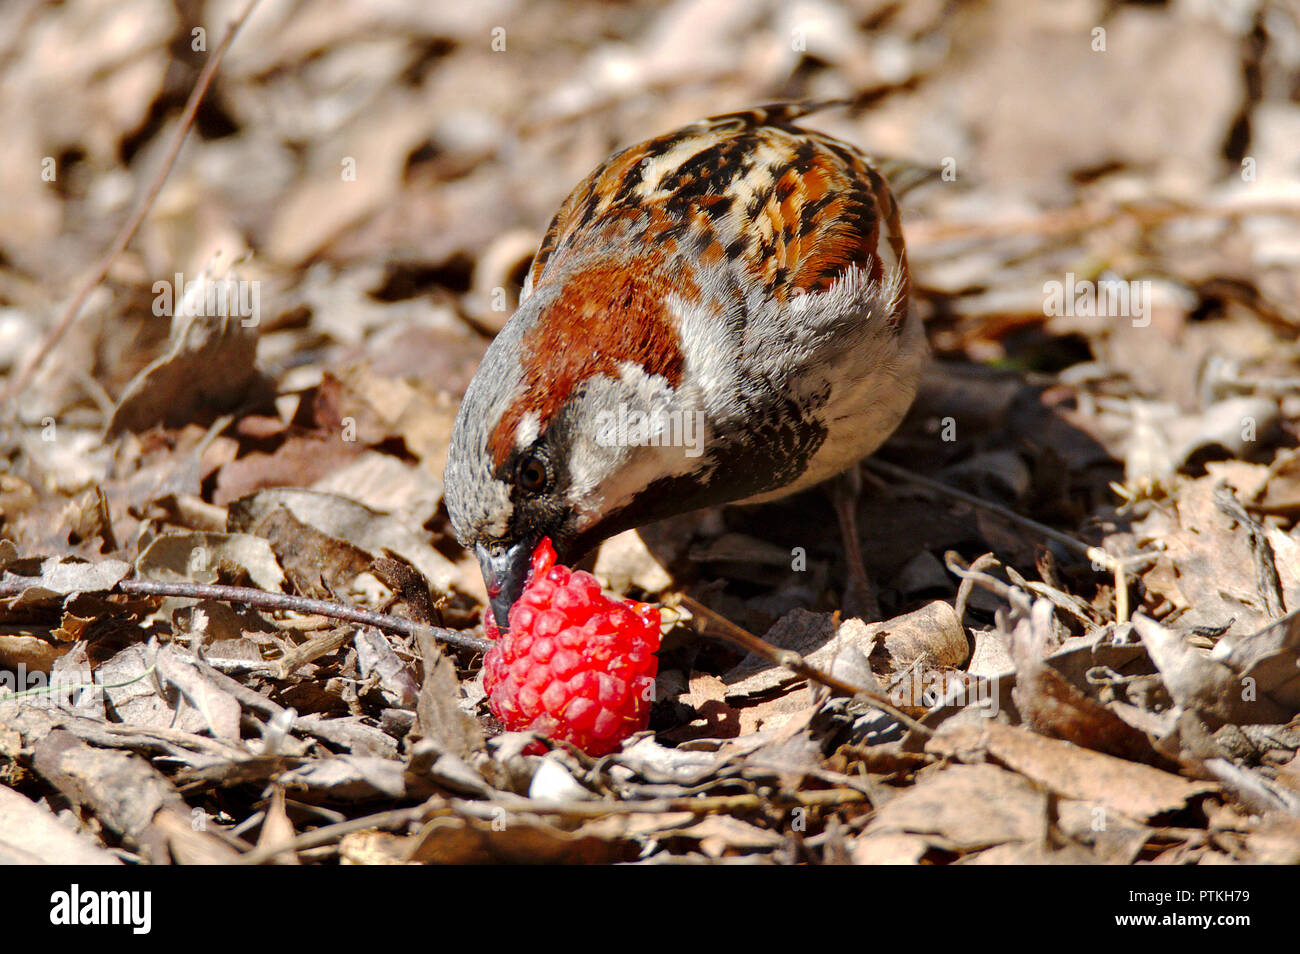 Hungry sparrow eating a red raspberry in the park. Stock Photo